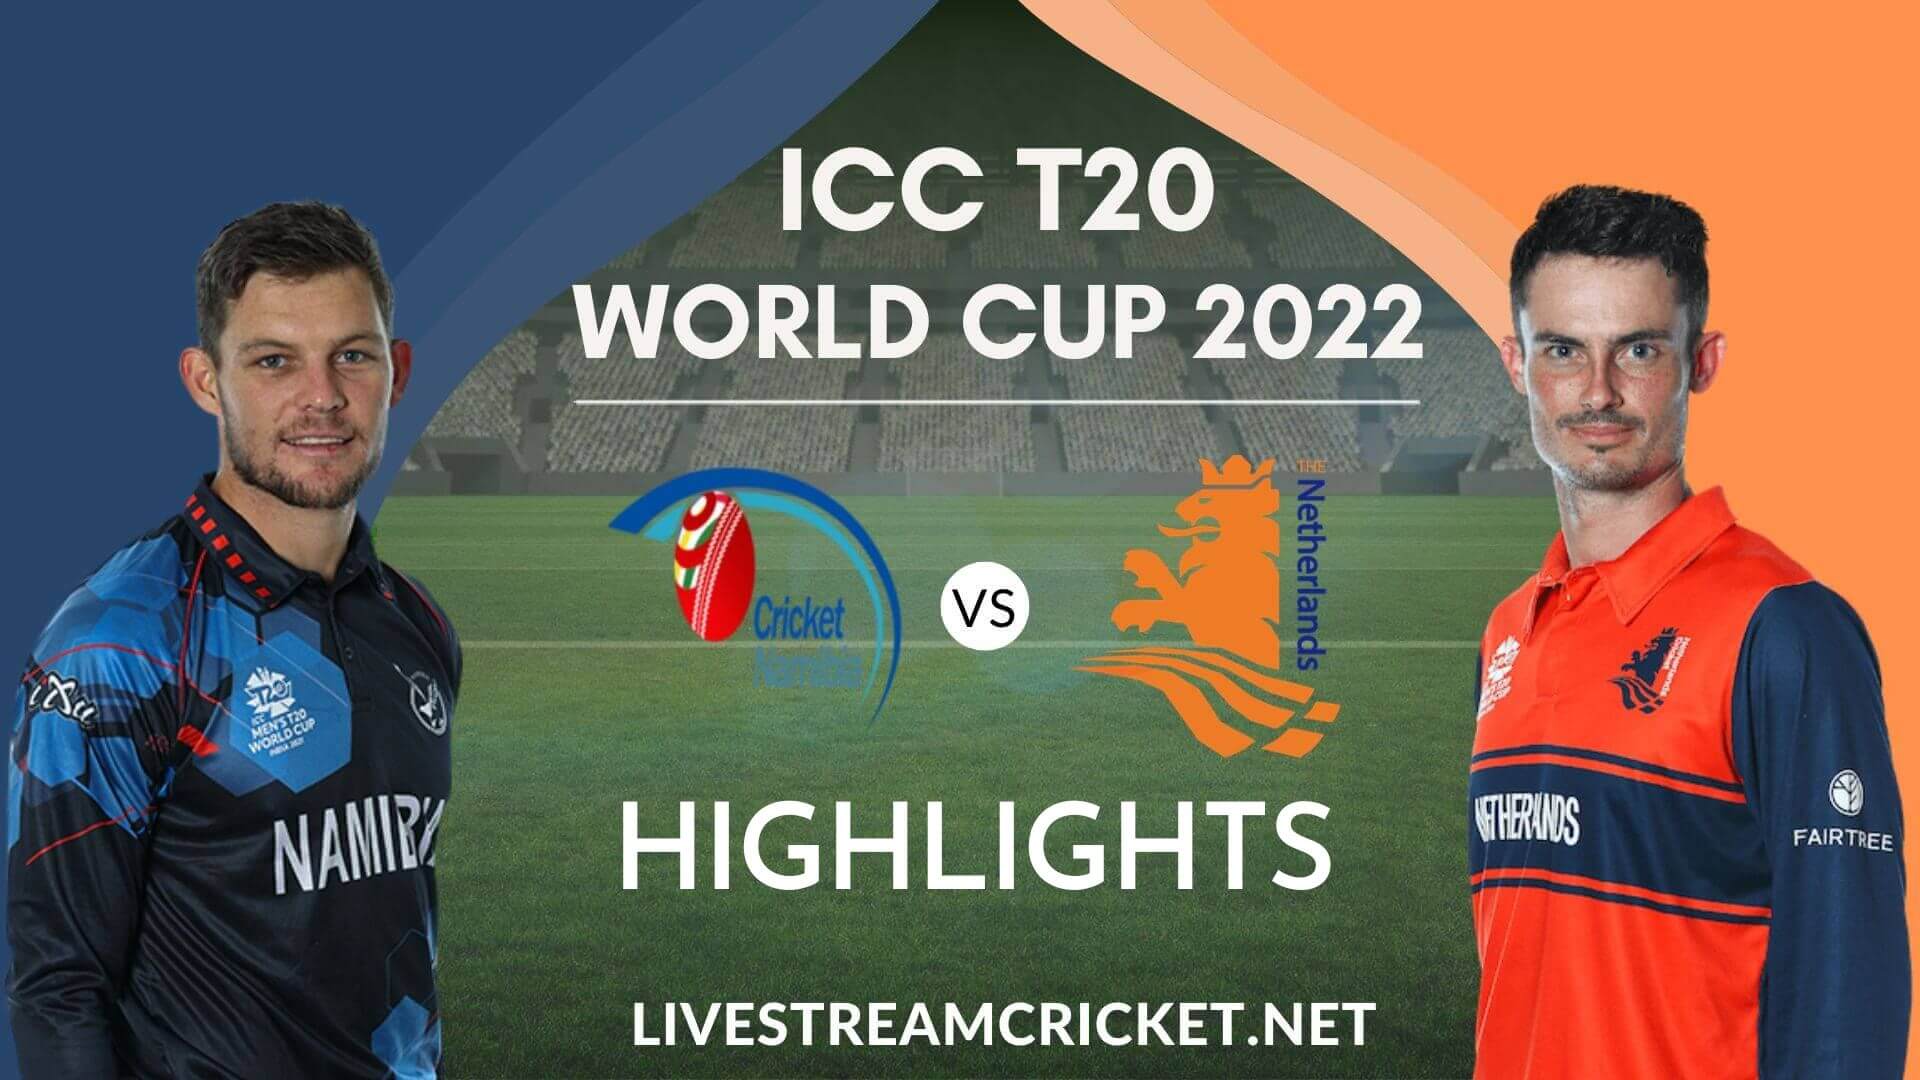 Namibia Vs Netherlands T20 WC Highlights 2022